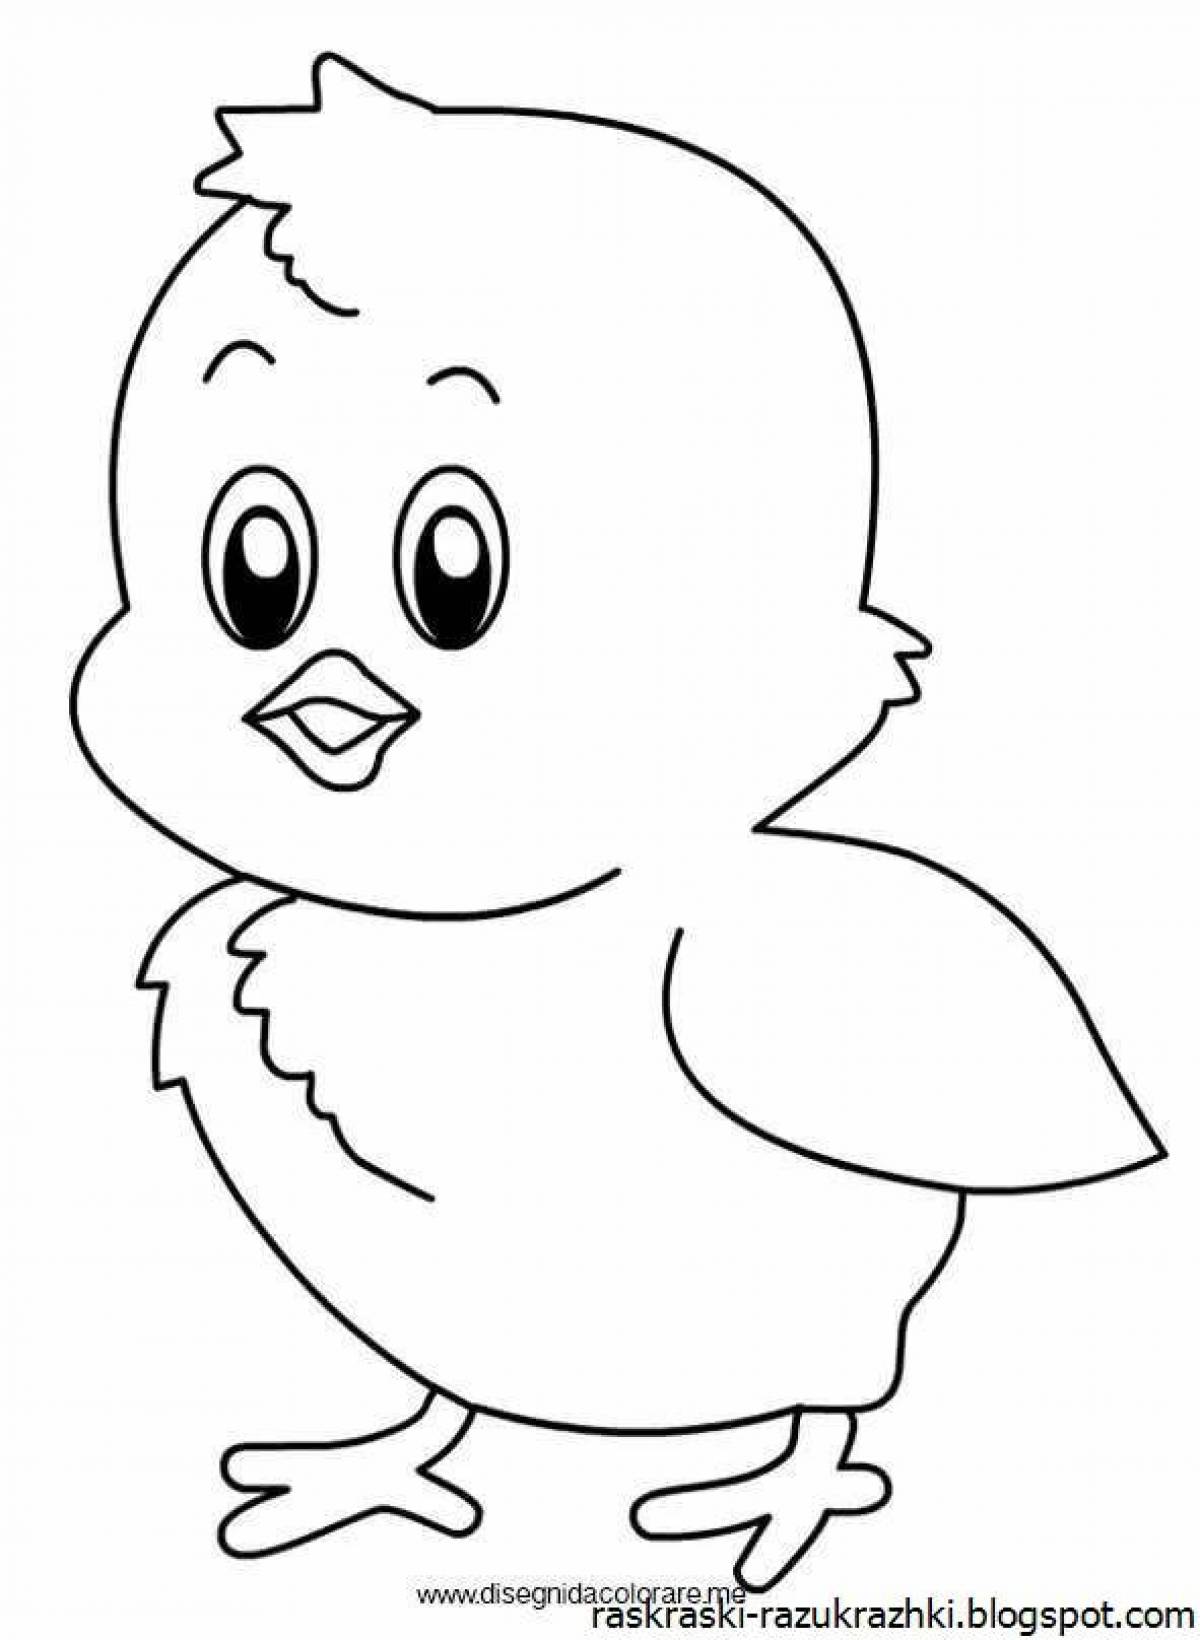 Adorable chick coloring book for 2-3 year olds